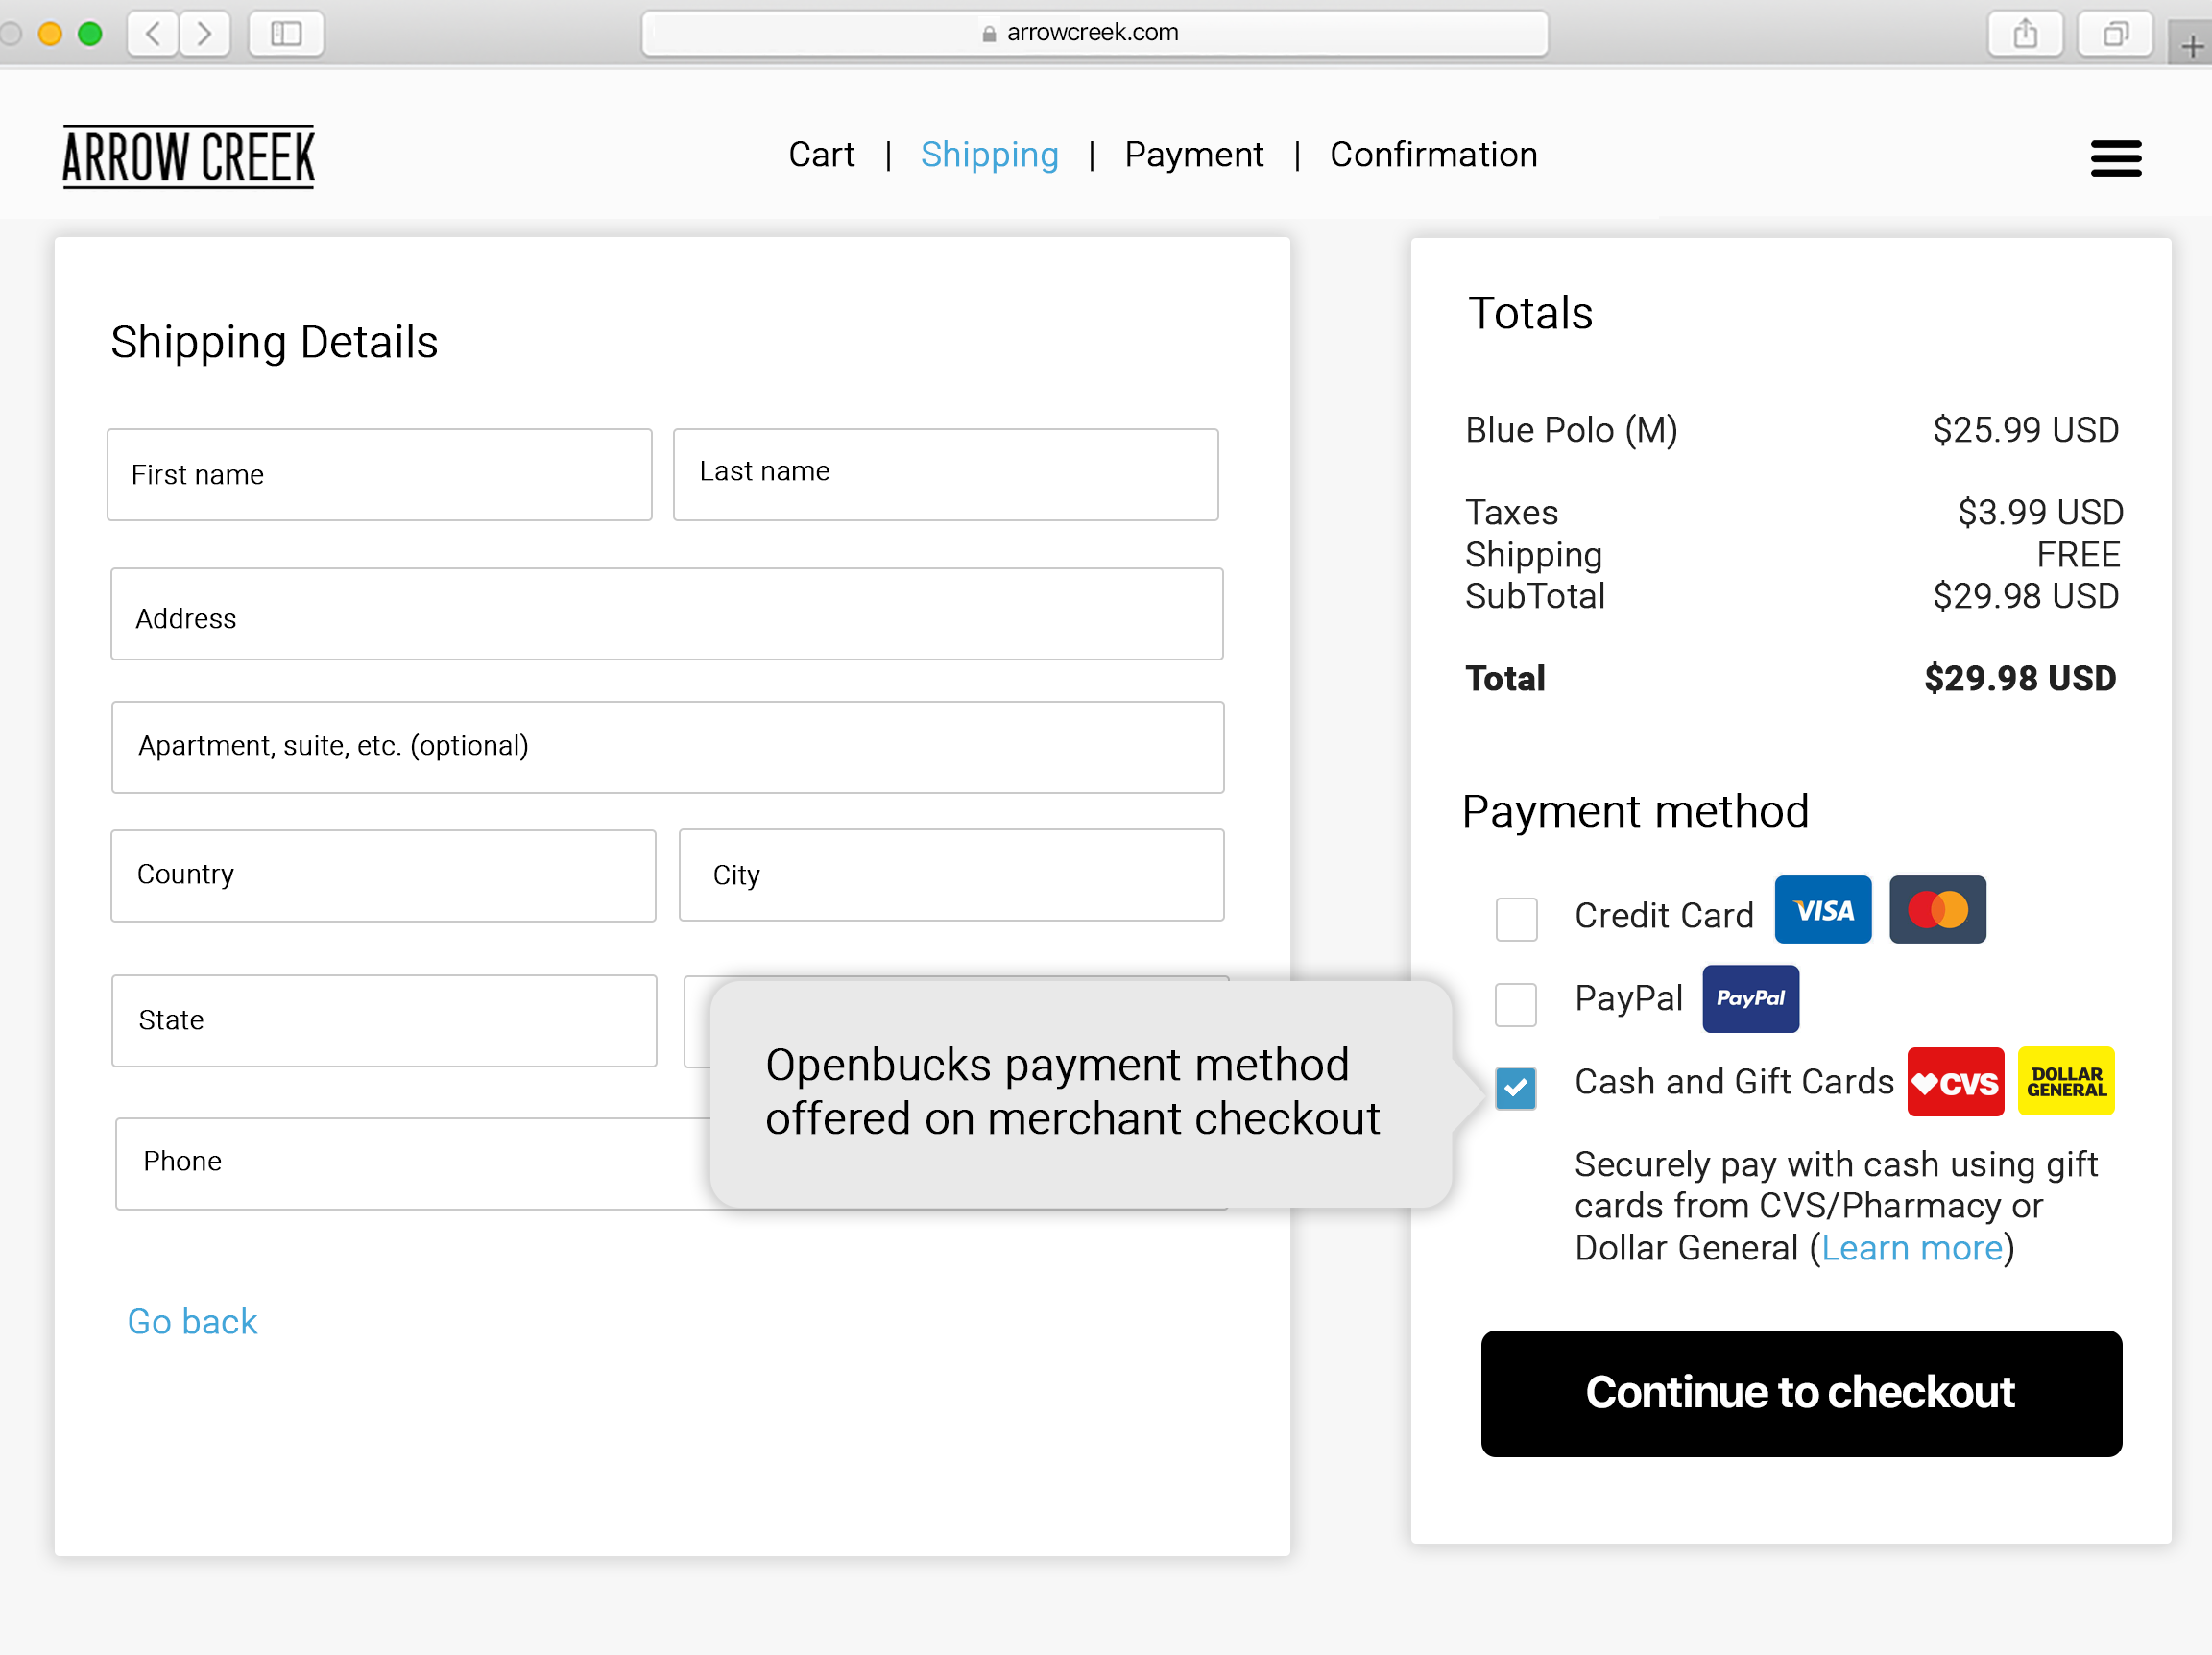 Openbucks payment method offered on merchant checkout